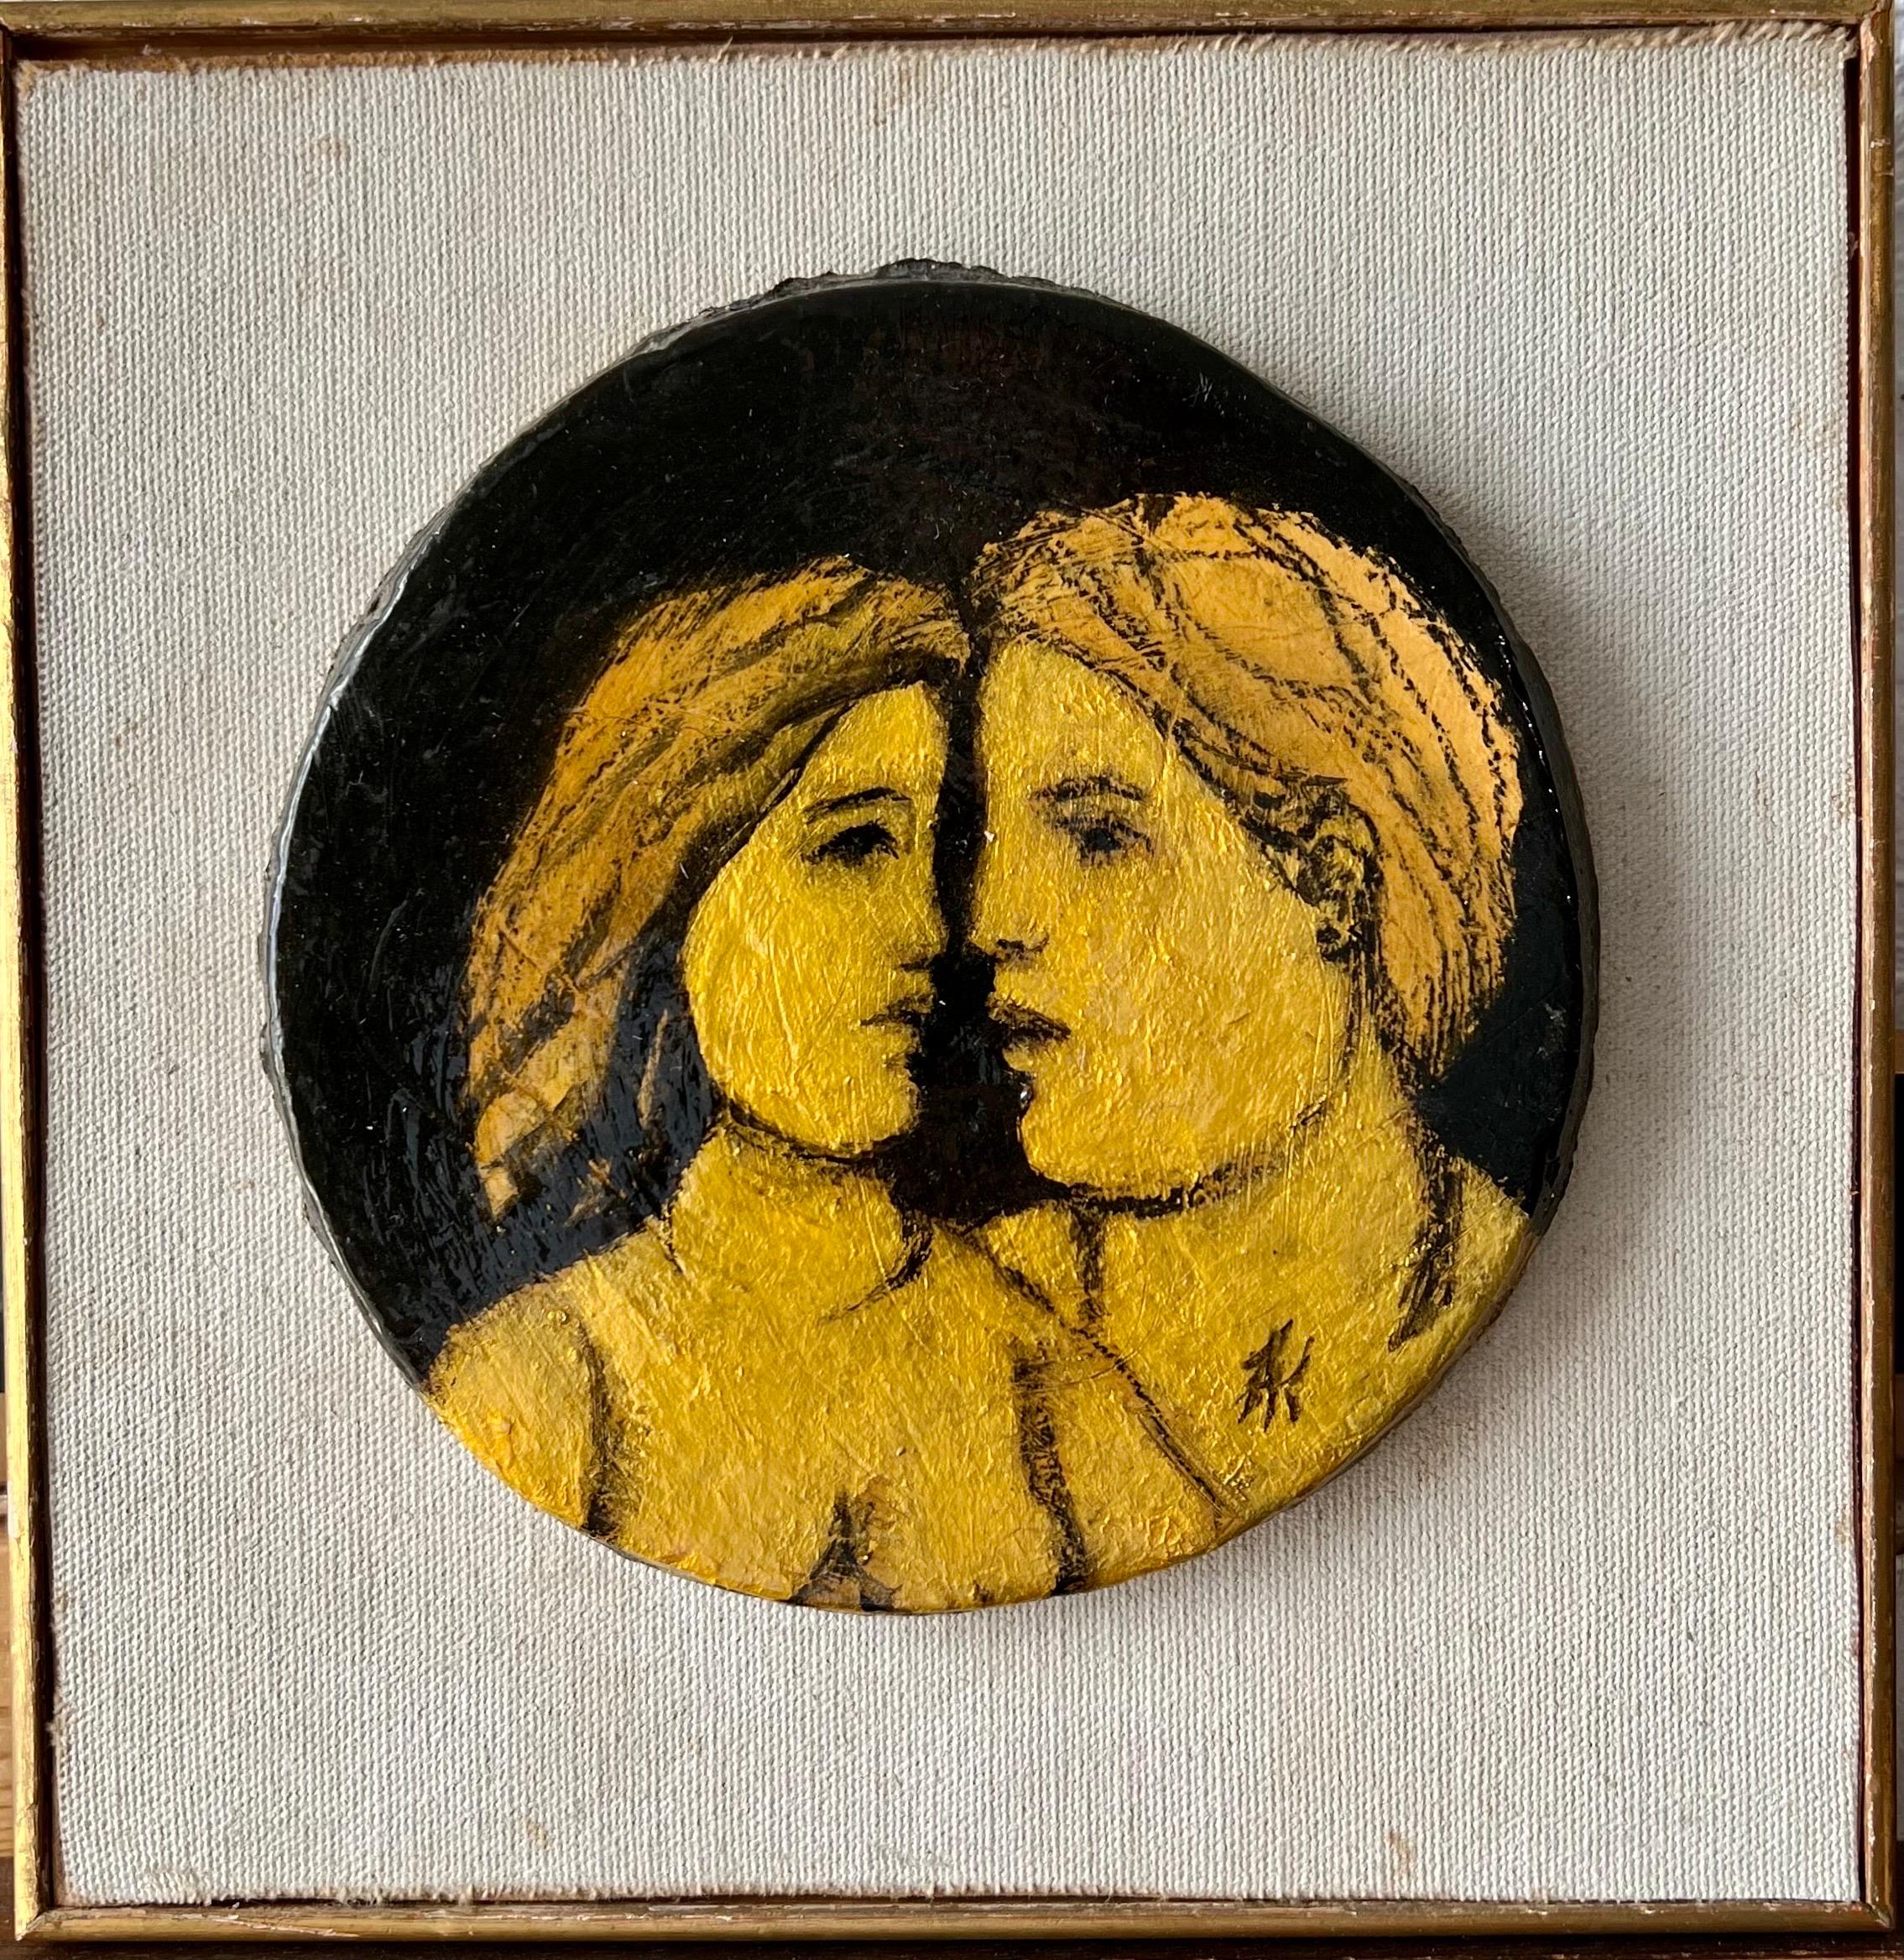 Frank Kleinholz (Brooklyn, 1901 - 1987)
Lovers 
Ceramic unique glazed miniature sculptural plaque with gold leaf or foil under the glaze.
Initialled recto and hand signed verso with a self portrait drawing.
Framed measures 8.75 X 8.75 inches, Plaque